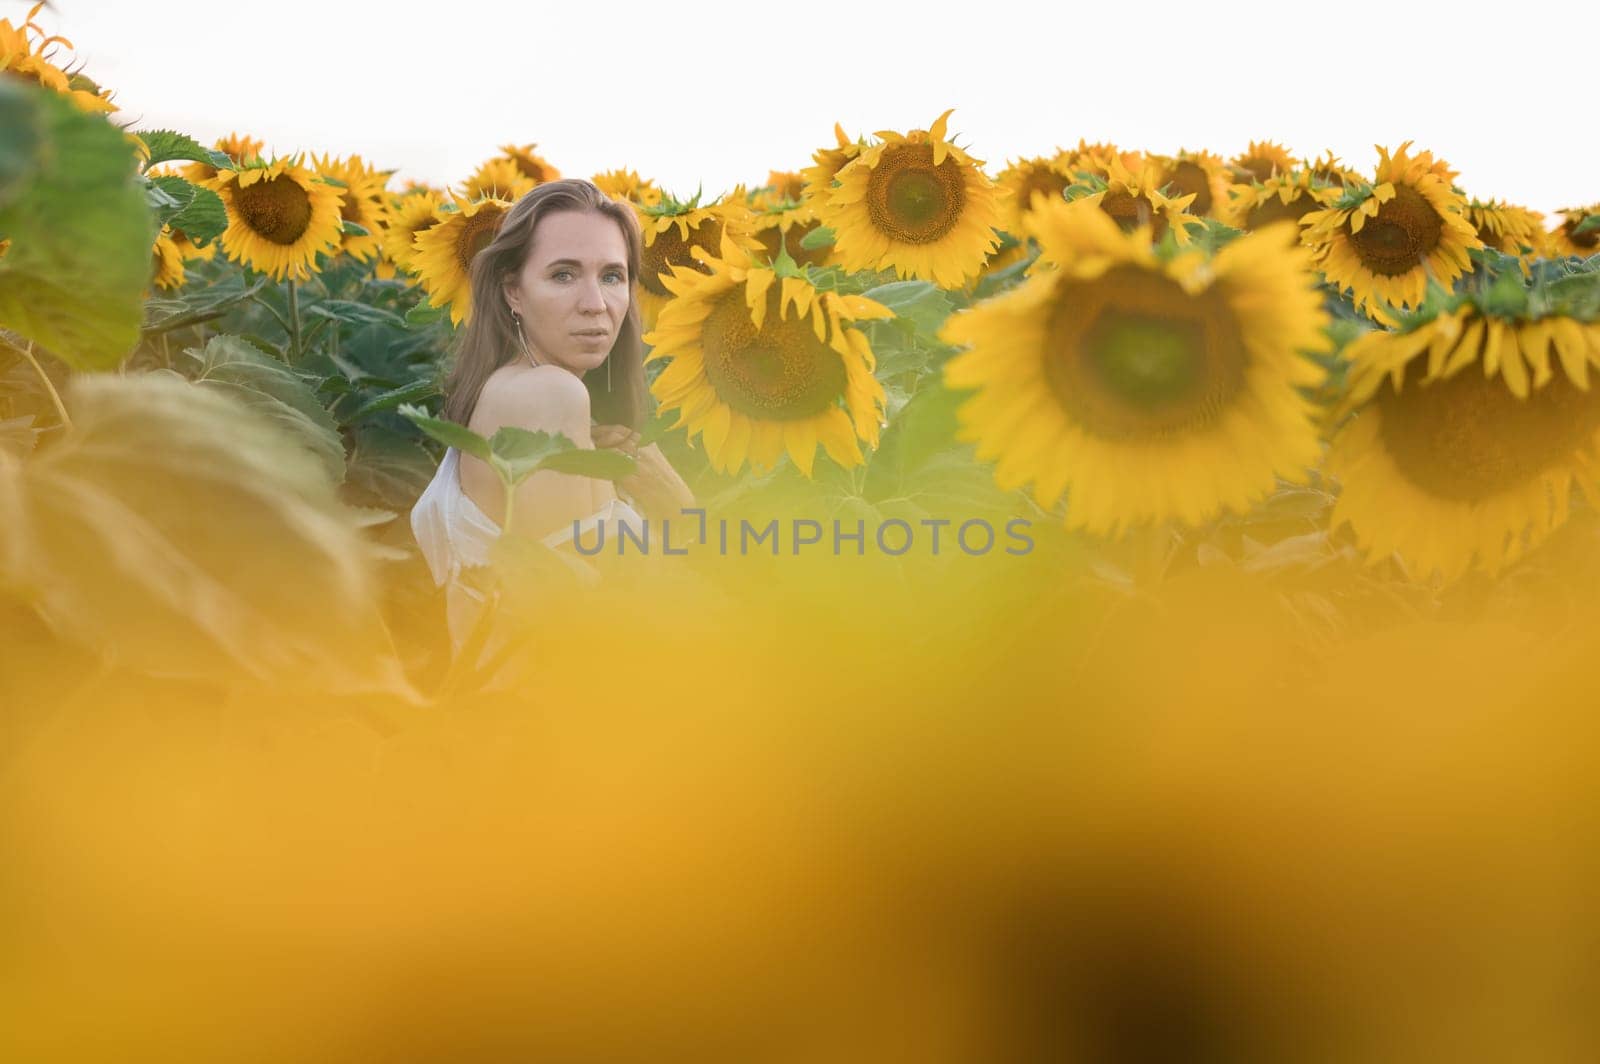 Portrait of beautiful woman posing in field with sunflowers, enjoying nature and summer.